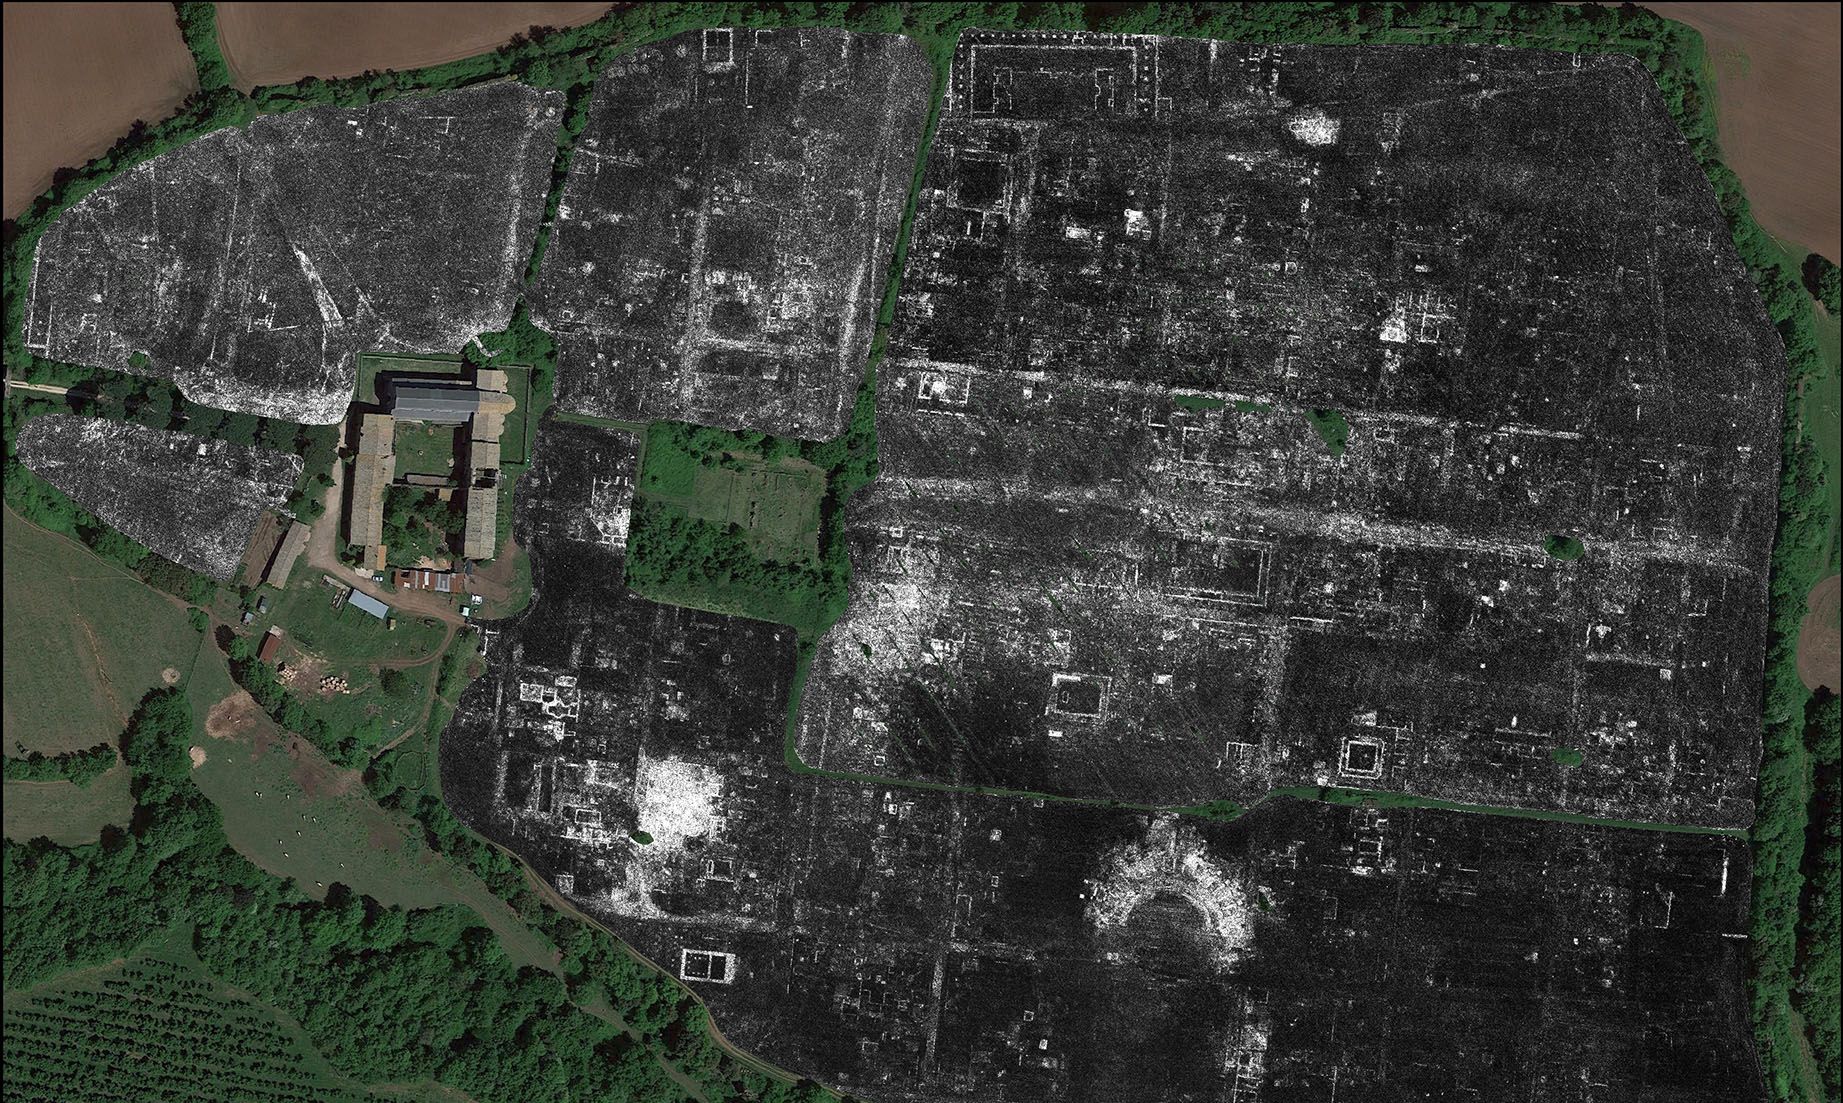 A slice of ground penetrating radar data from Falerii Novi, revealing the outlines of the town’s buildings. Image: L. Verdonck